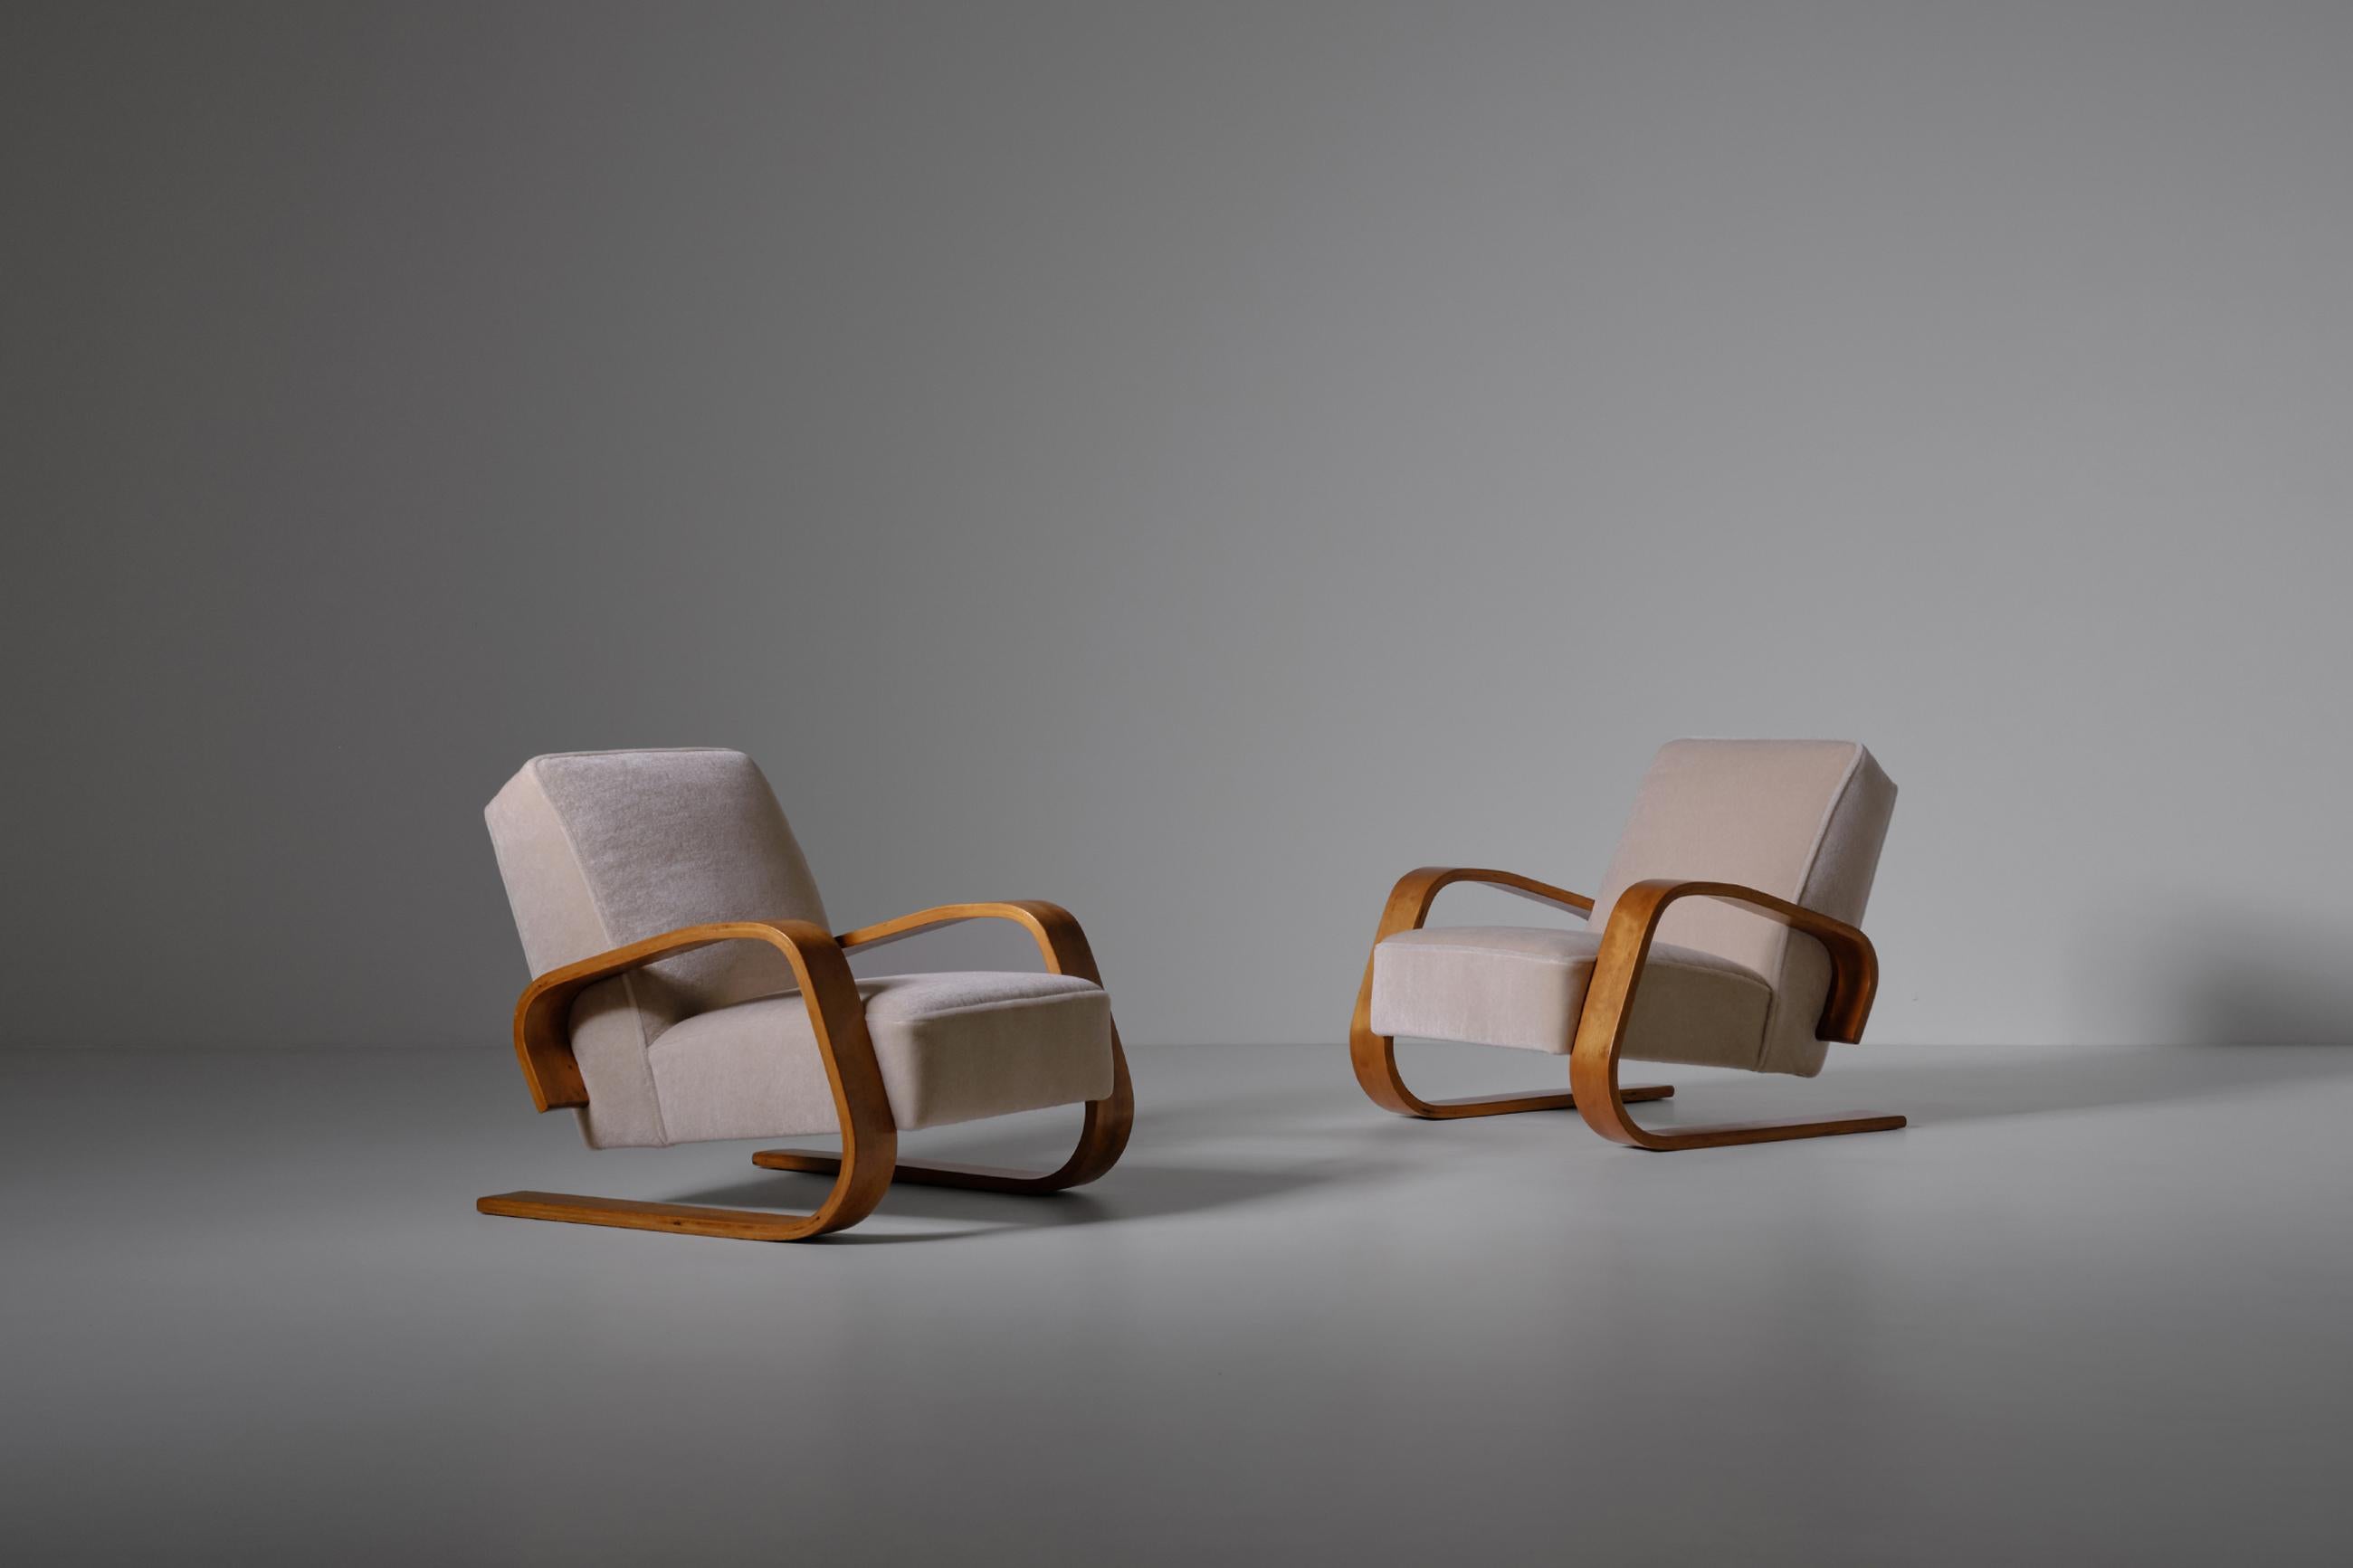 Rare early set of ‘Tank' chairs Model 400 by Alvar Aalto, Finland 1940s. This early chairs has been produced by the first producer: O.Y. Huonekalu-ja Rakennustyötehdas A.b. in Turku. Stunning design out of a laminated bent birch wooden frame and a